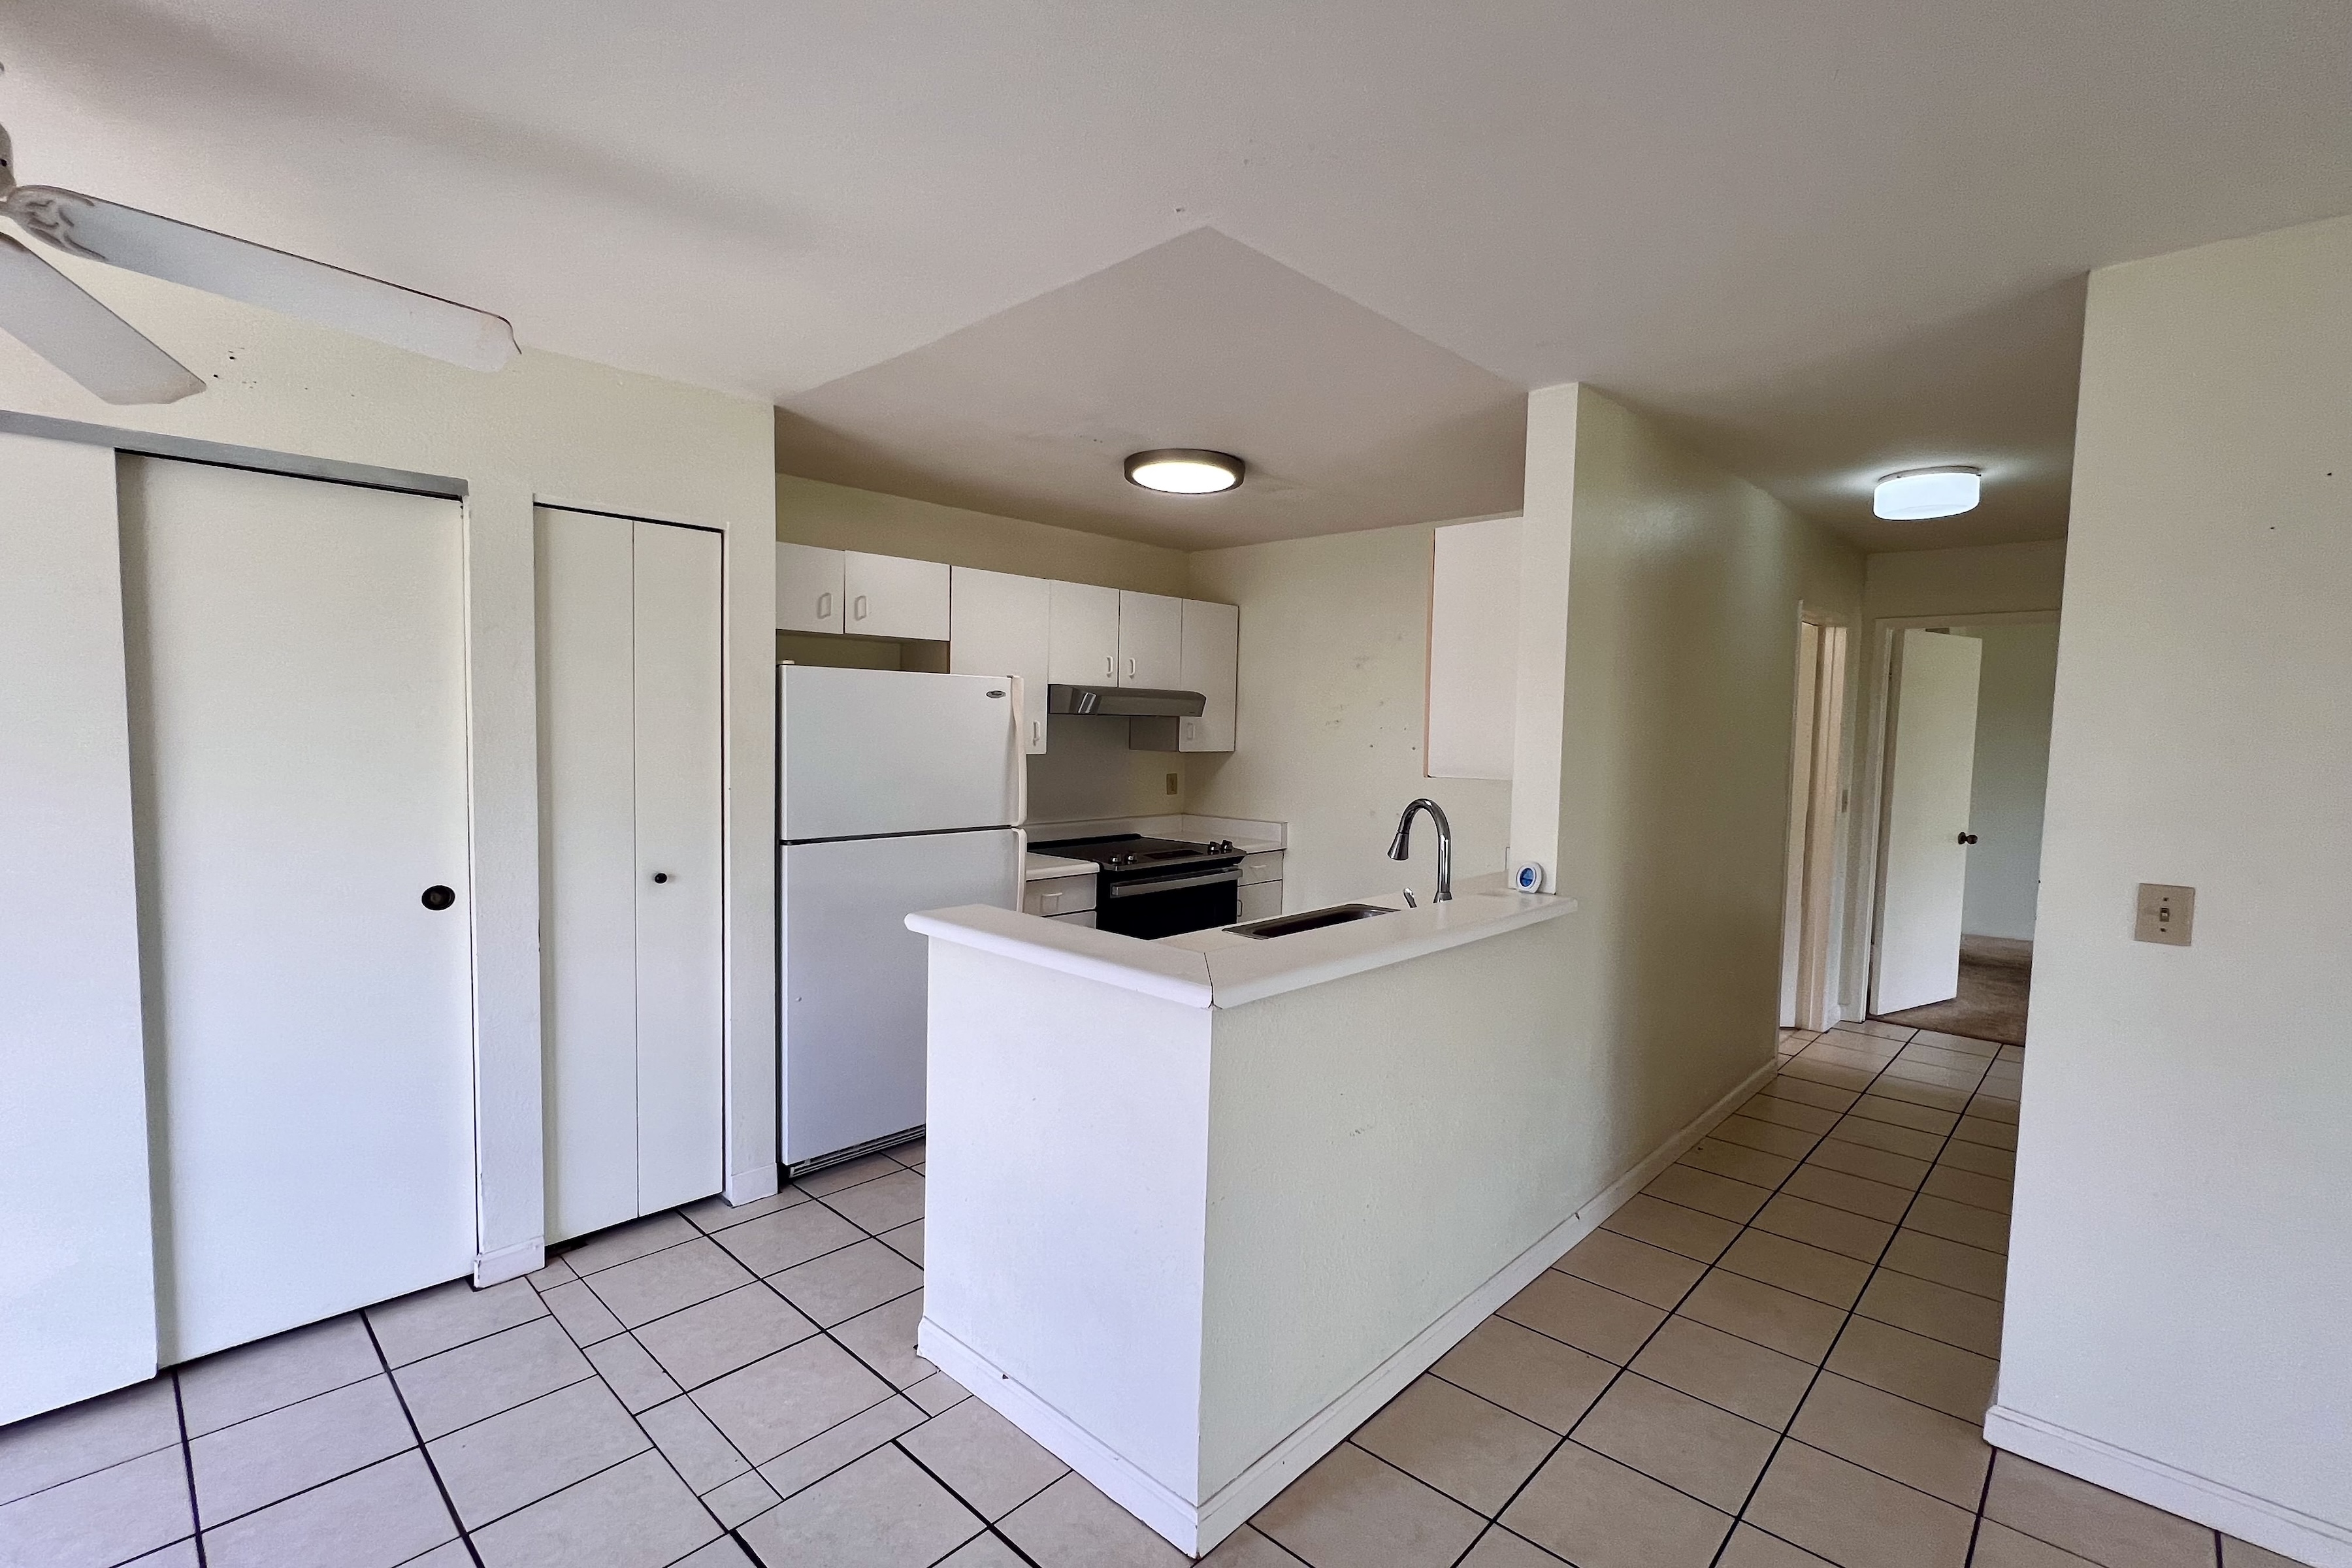 Discover the potential in this 2-bedroom, 1.5 bathroom condo in Kihei